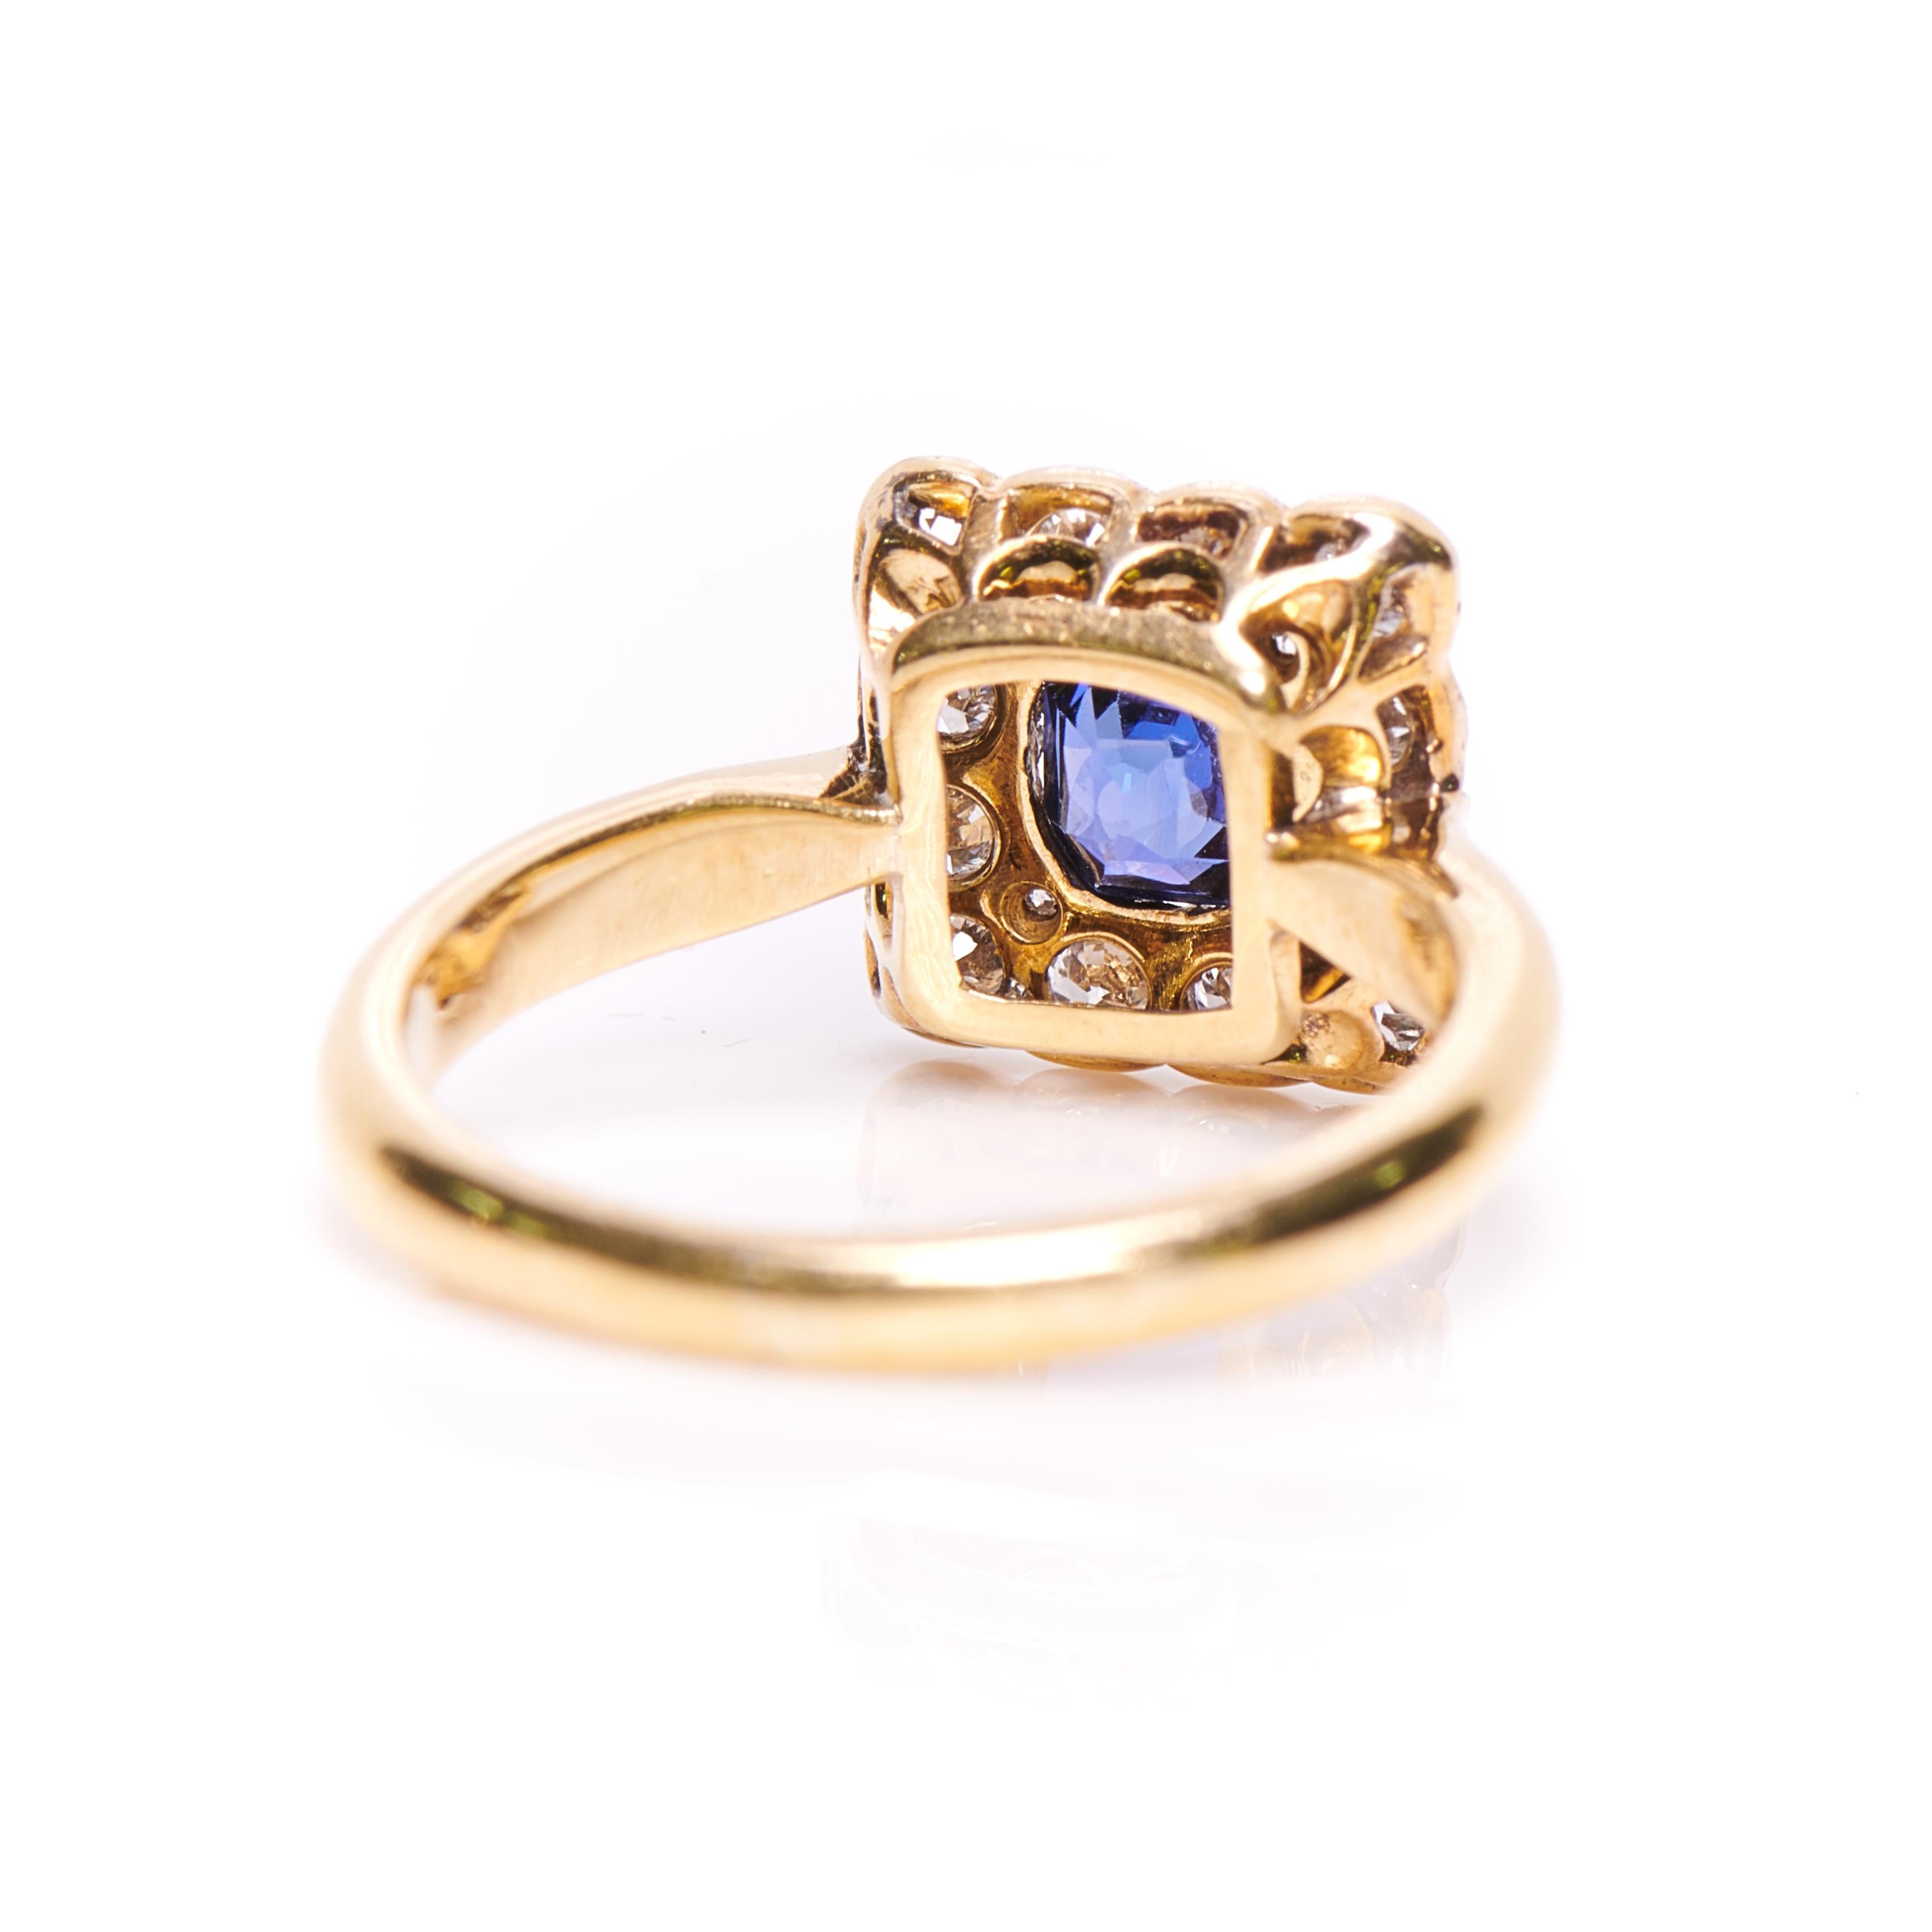 Cushion Cut Antique, Art Deco, 18 Carat Gold, Sapphire and Diamond Engagement Ring For Sale